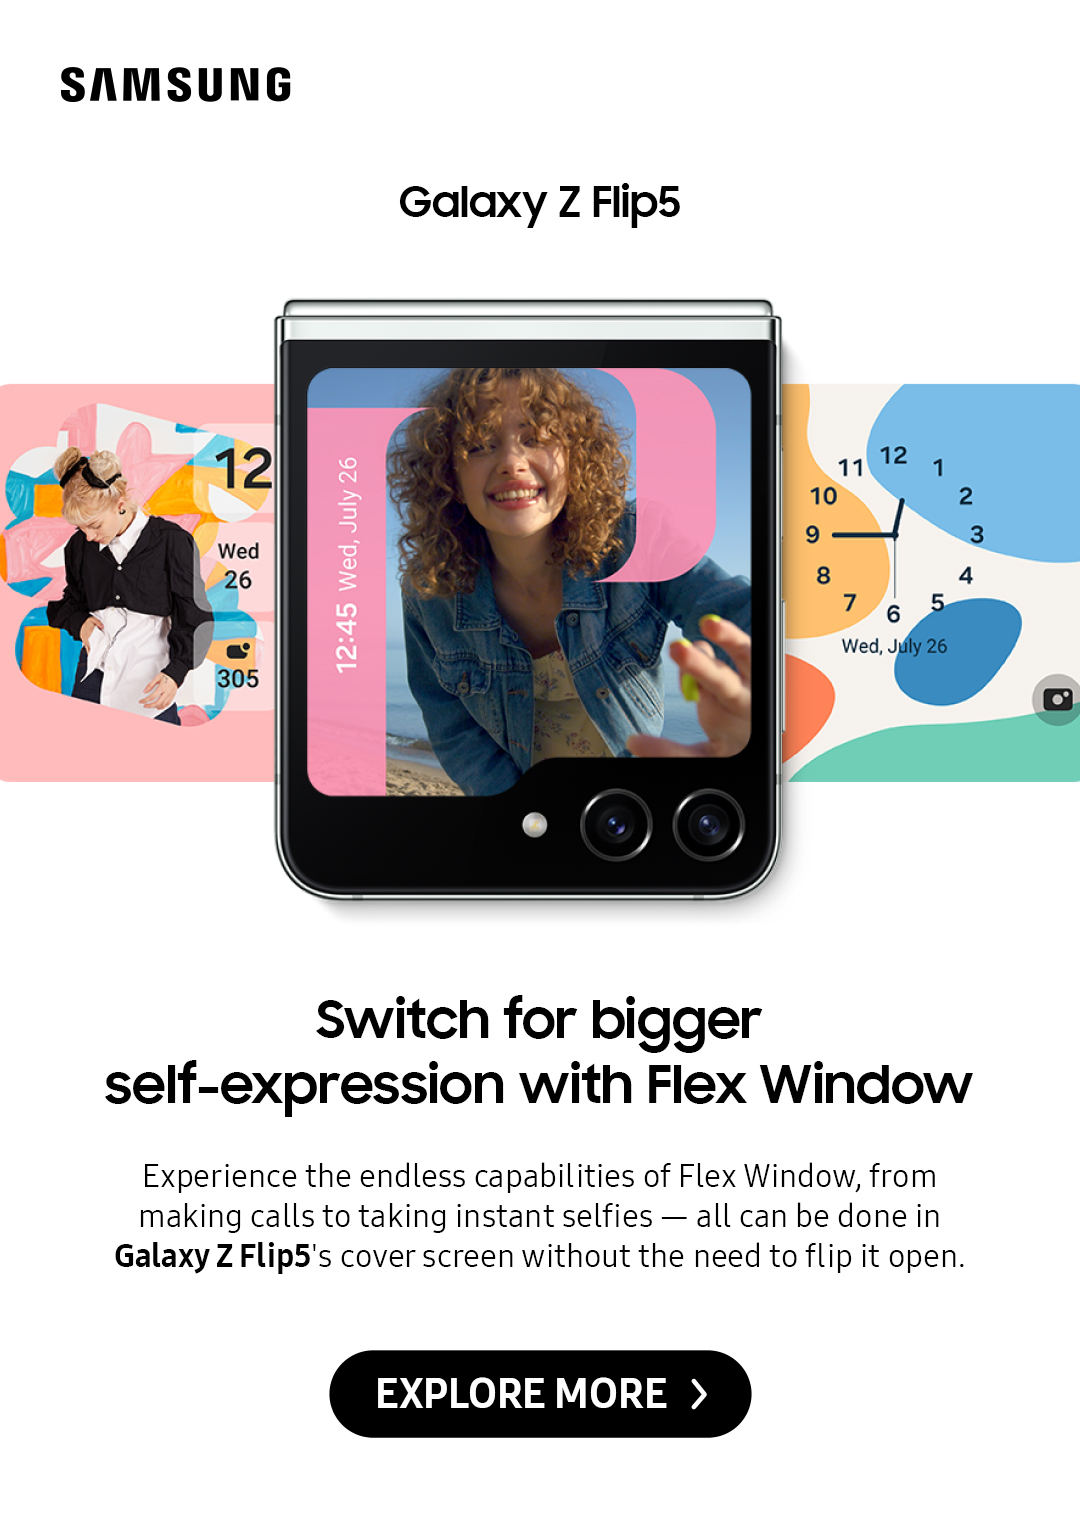 Samsung Galaxy Z Flip5: Switch for bigger self-expression with Flex Window | Experience the endless capabilities of Flex Window, from making calls to taking instant selfies -- all can be done in Galaxy Z Flip5's cover screen without the need to flip it open. Click here to explore more!